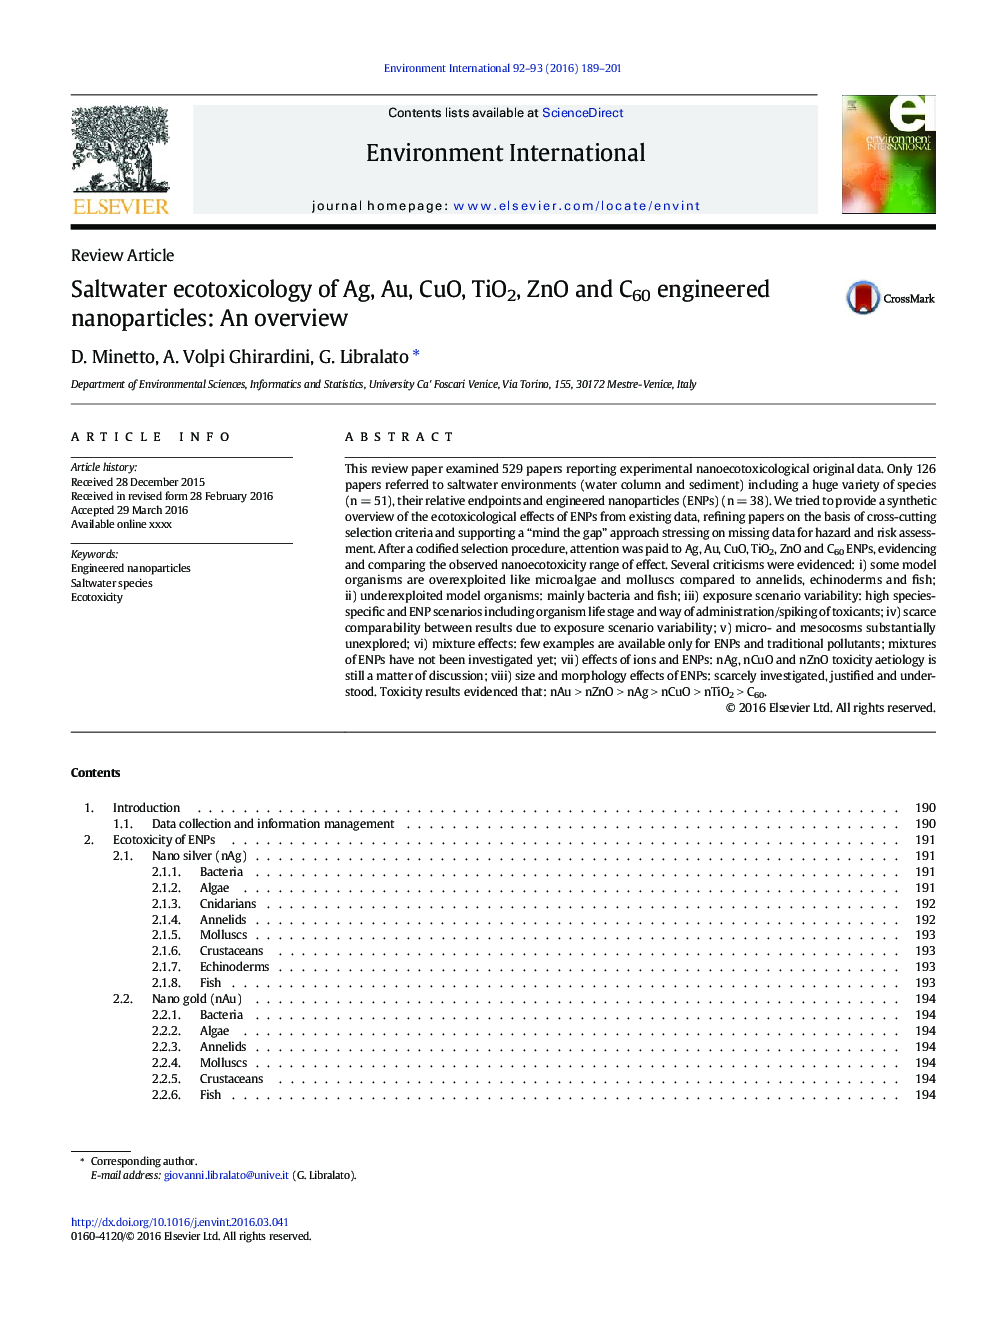 Saltwater ecotoxicology of Ag, Au, CuO, TiO2, ZnO and C60 engineered nanoparticles: An overview